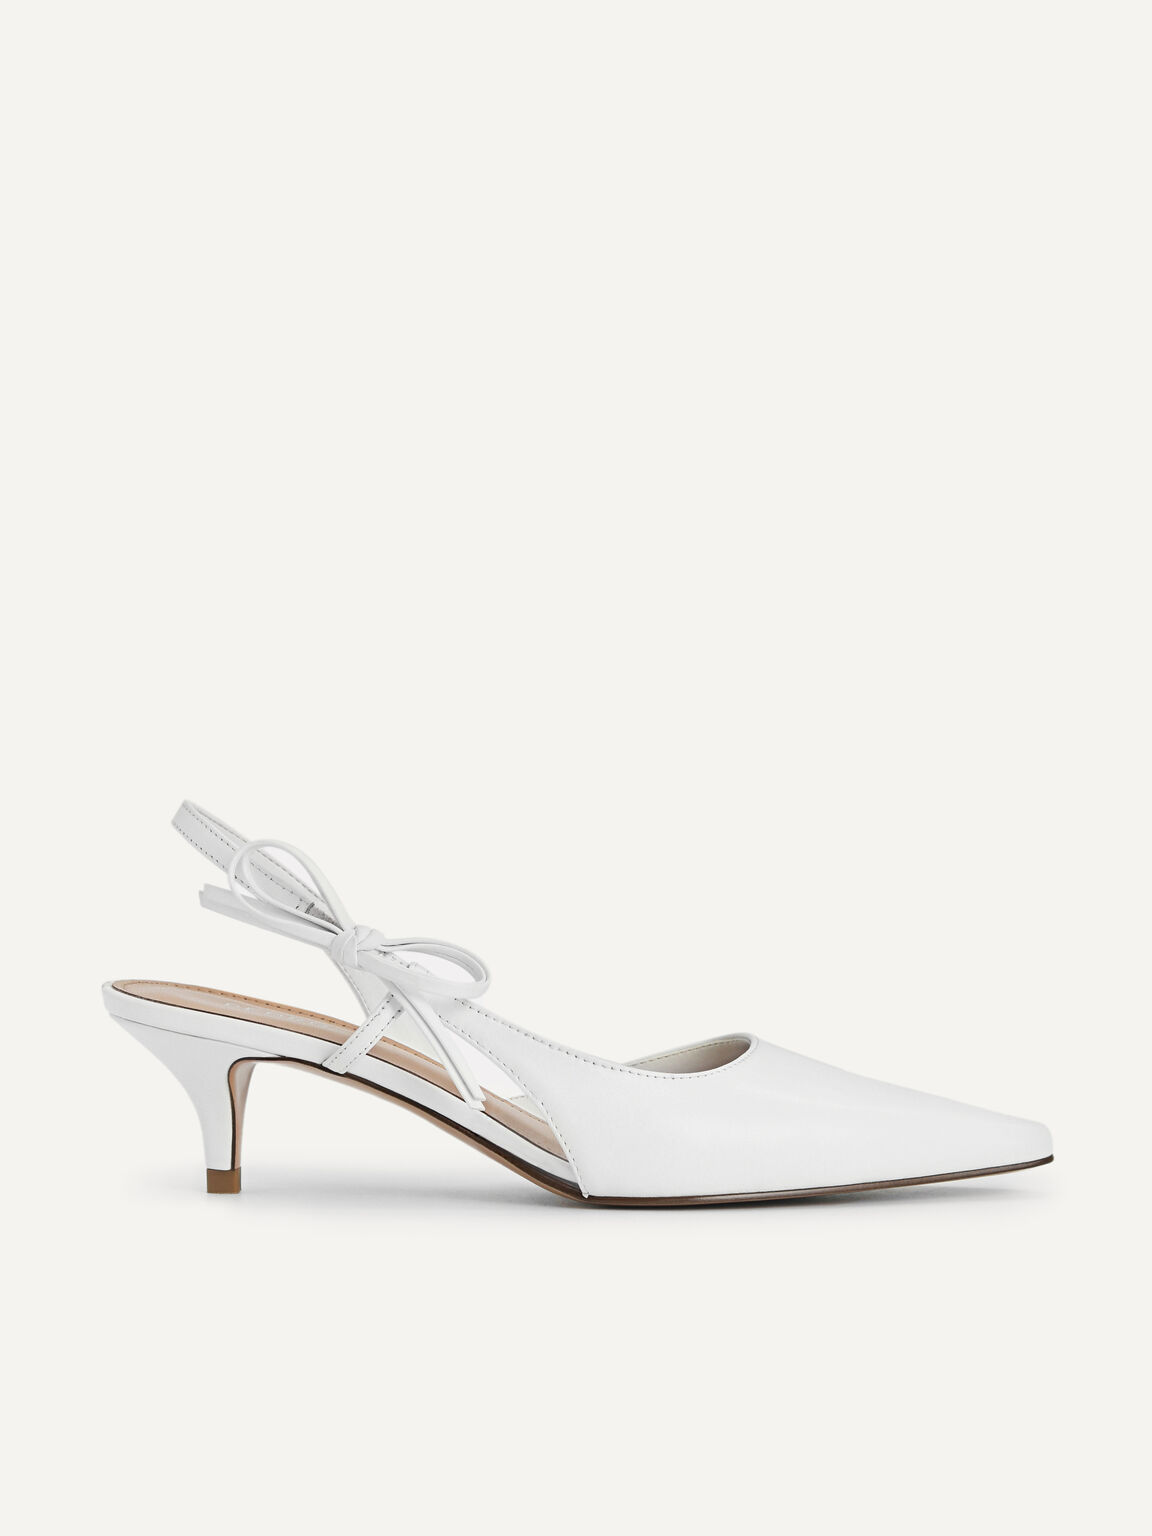 Bow-Detailed Leather Slingback Heels, White, hi-res